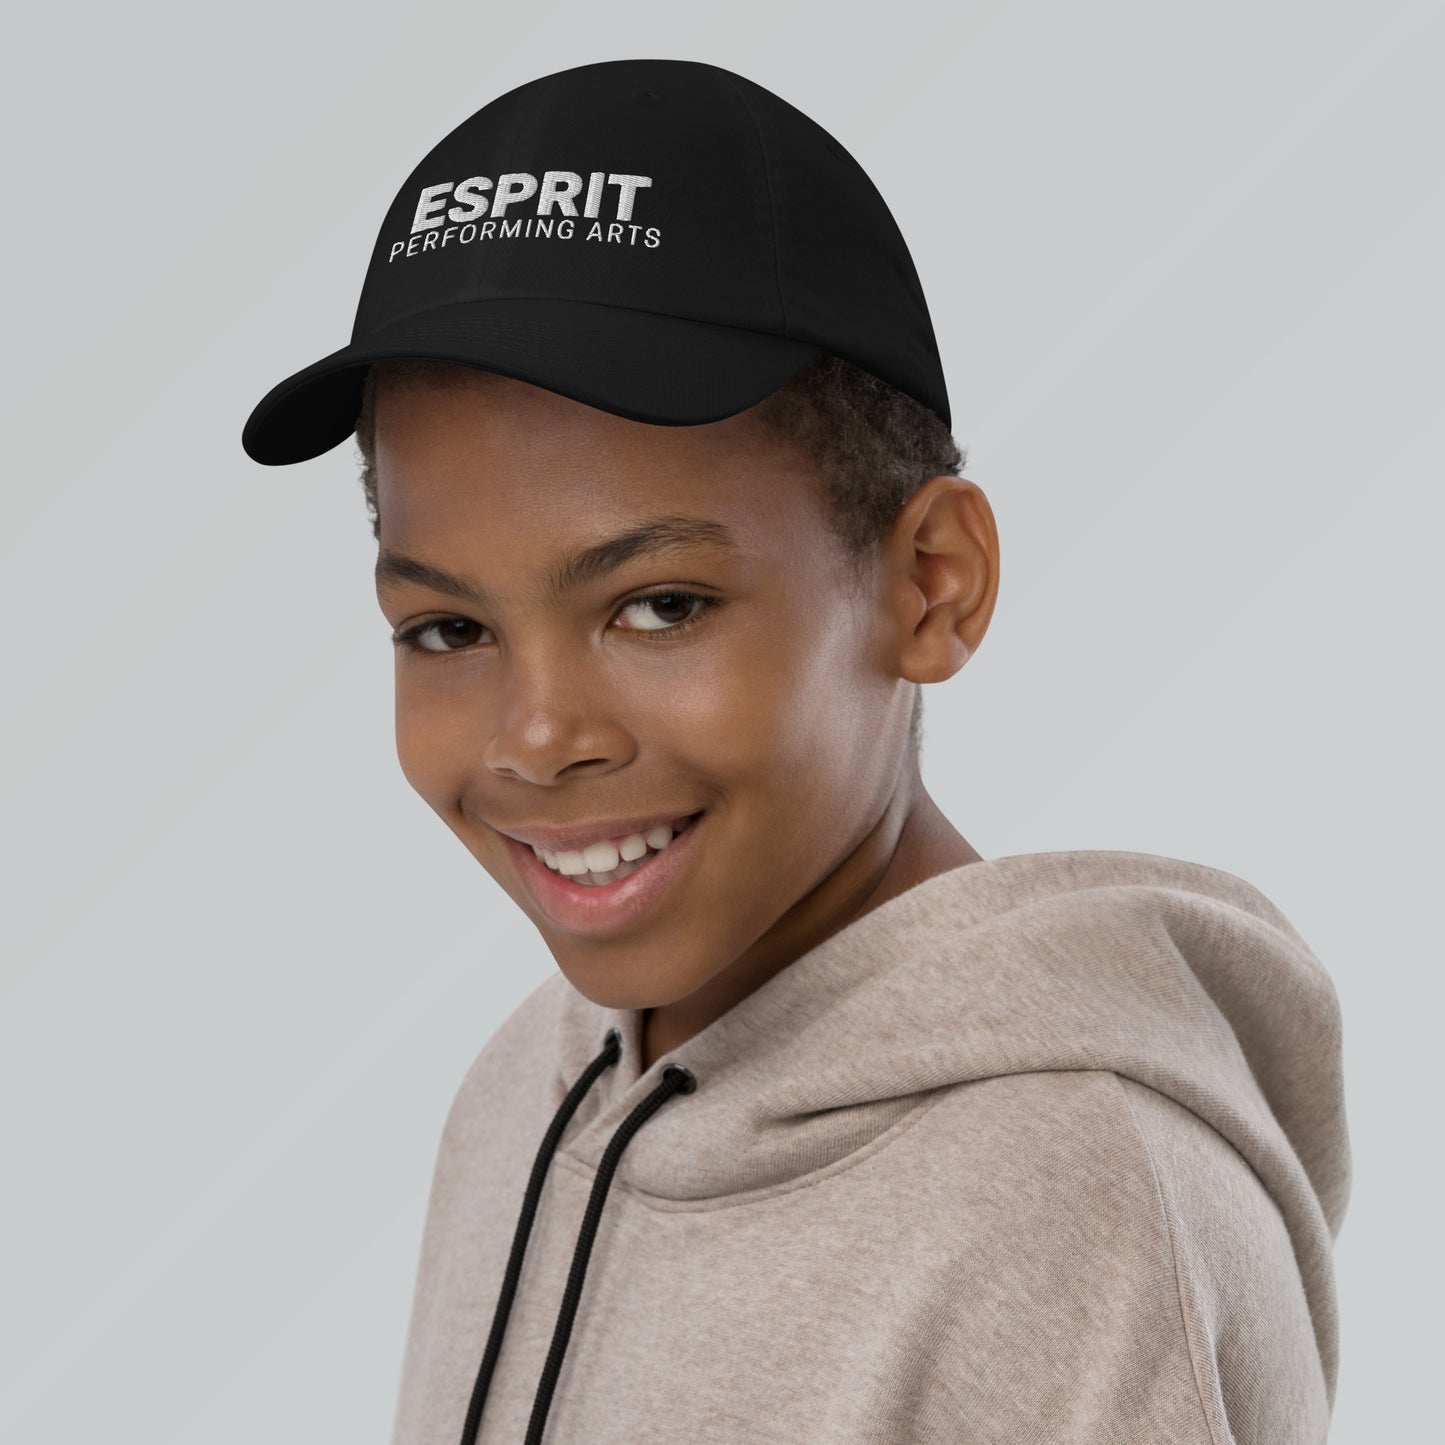 Esprit Performing Arts Hat - Youth